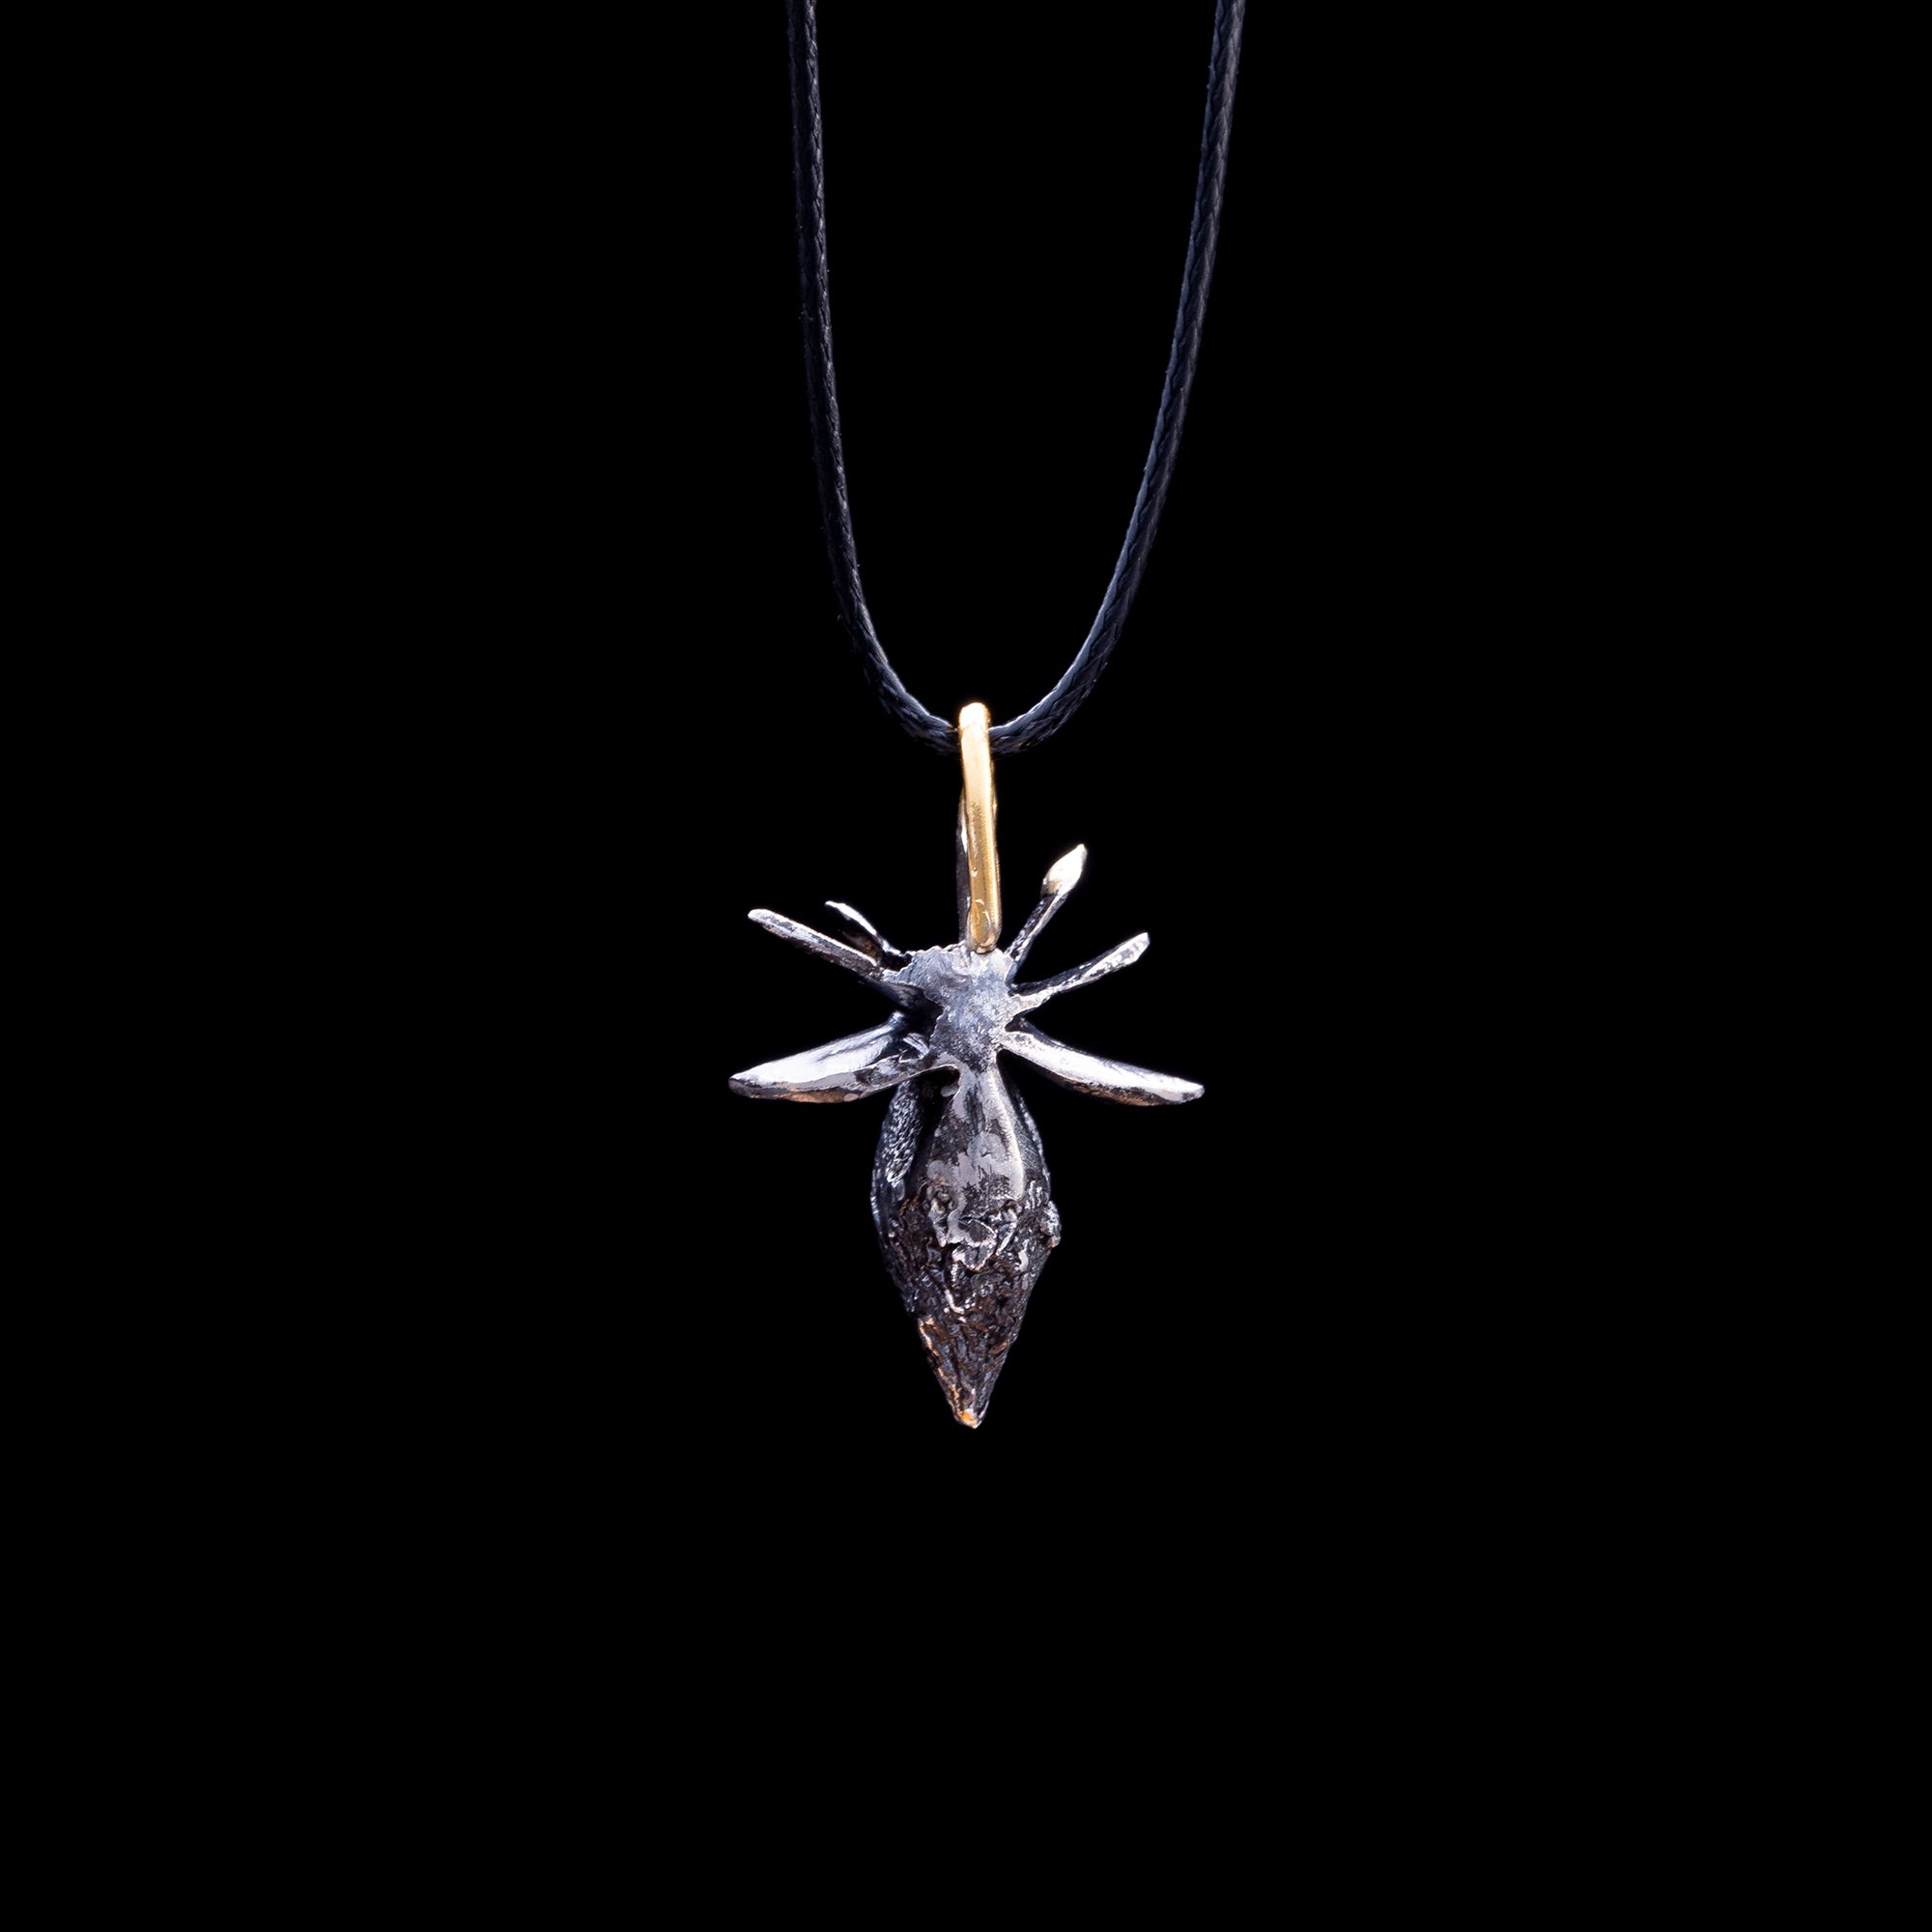 Star Anise Seed Pendant